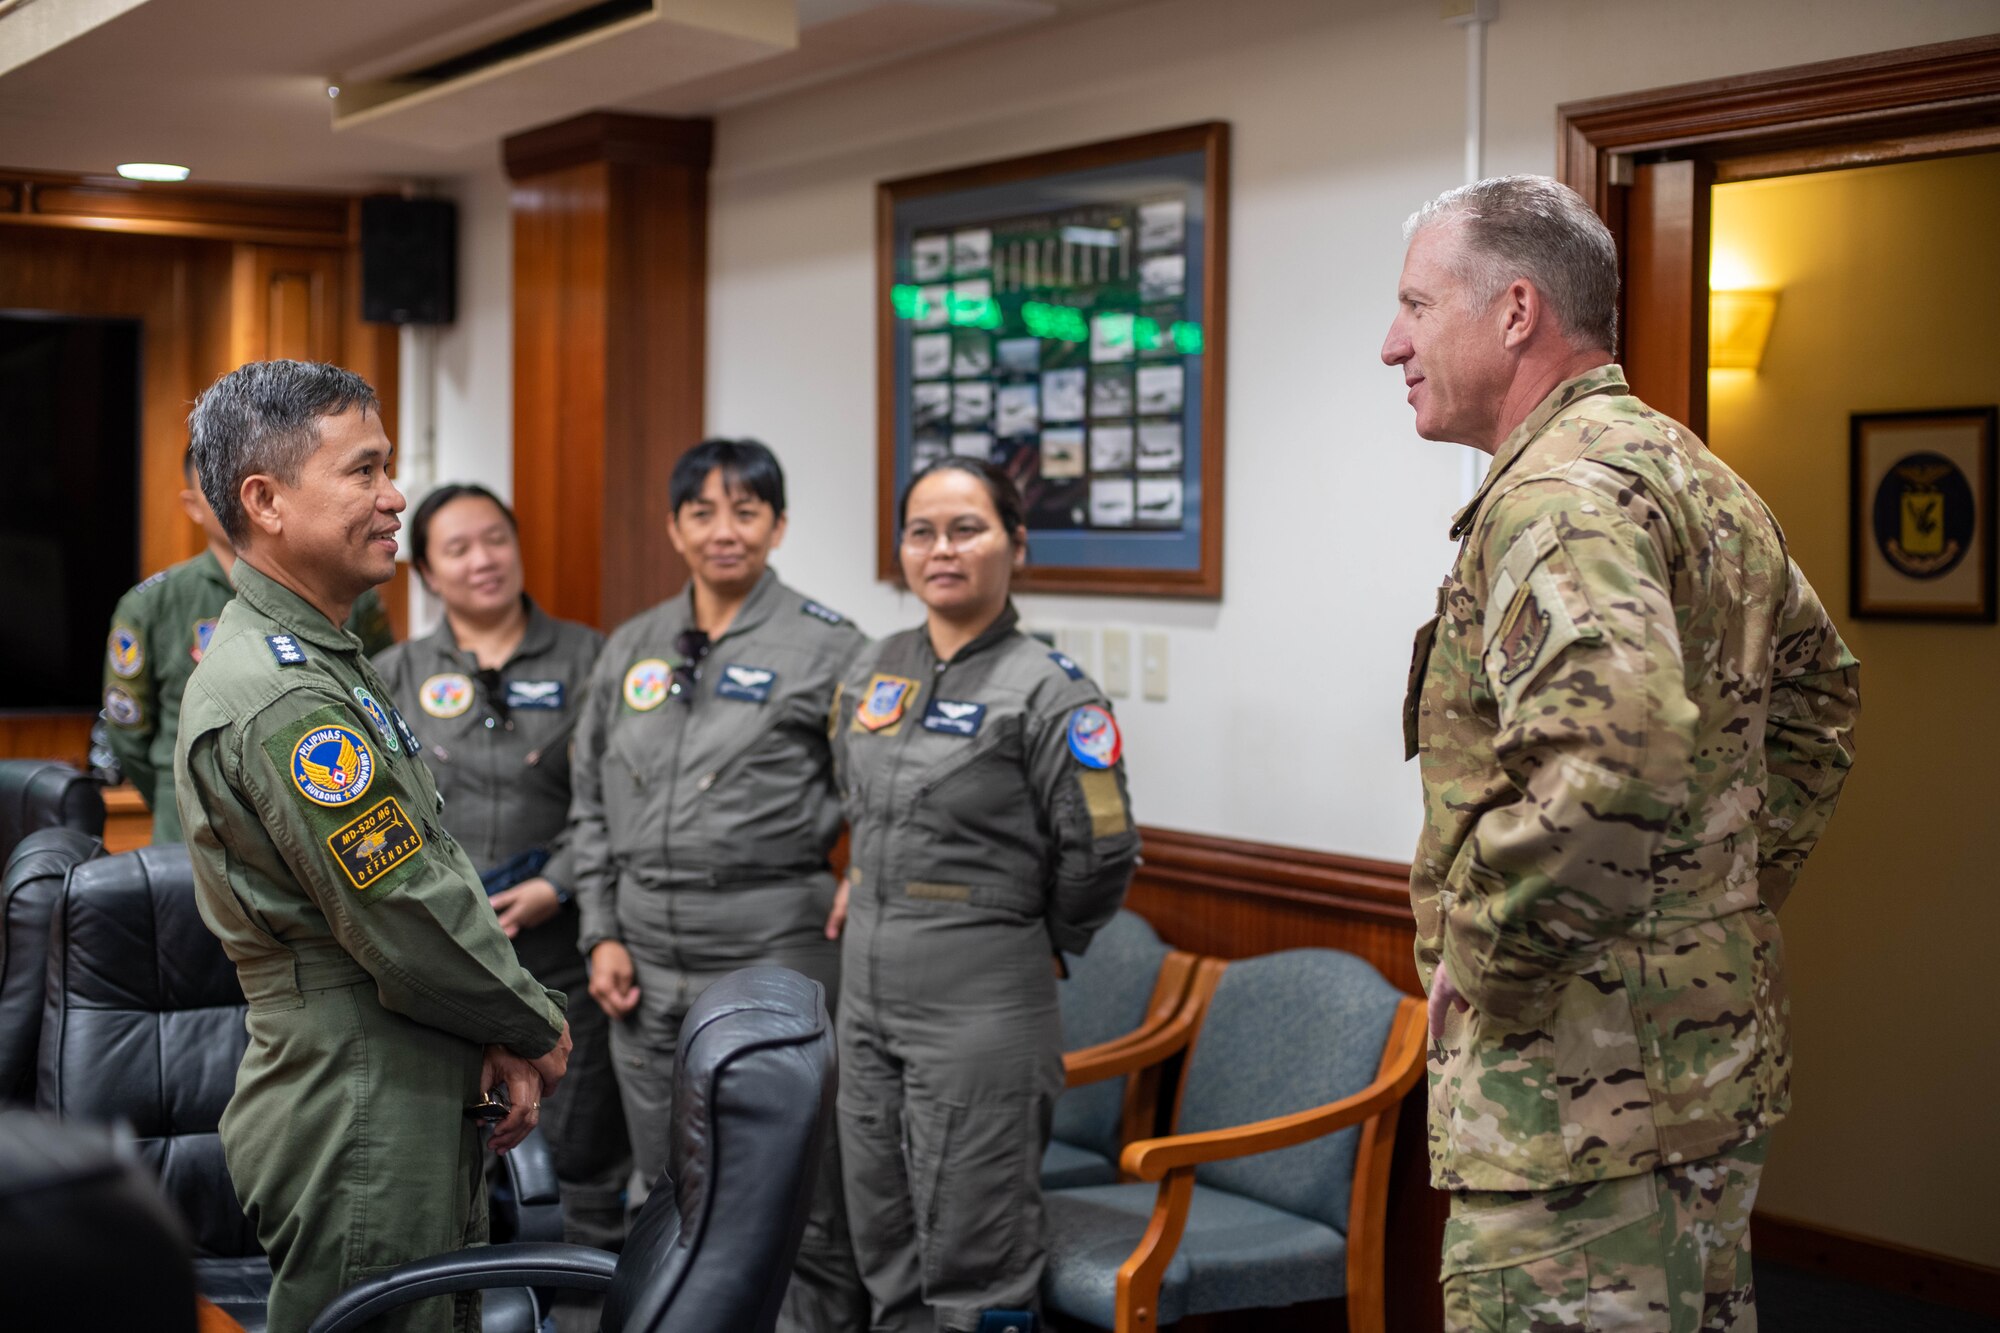 An Airman and Philippine Air Force members meet.